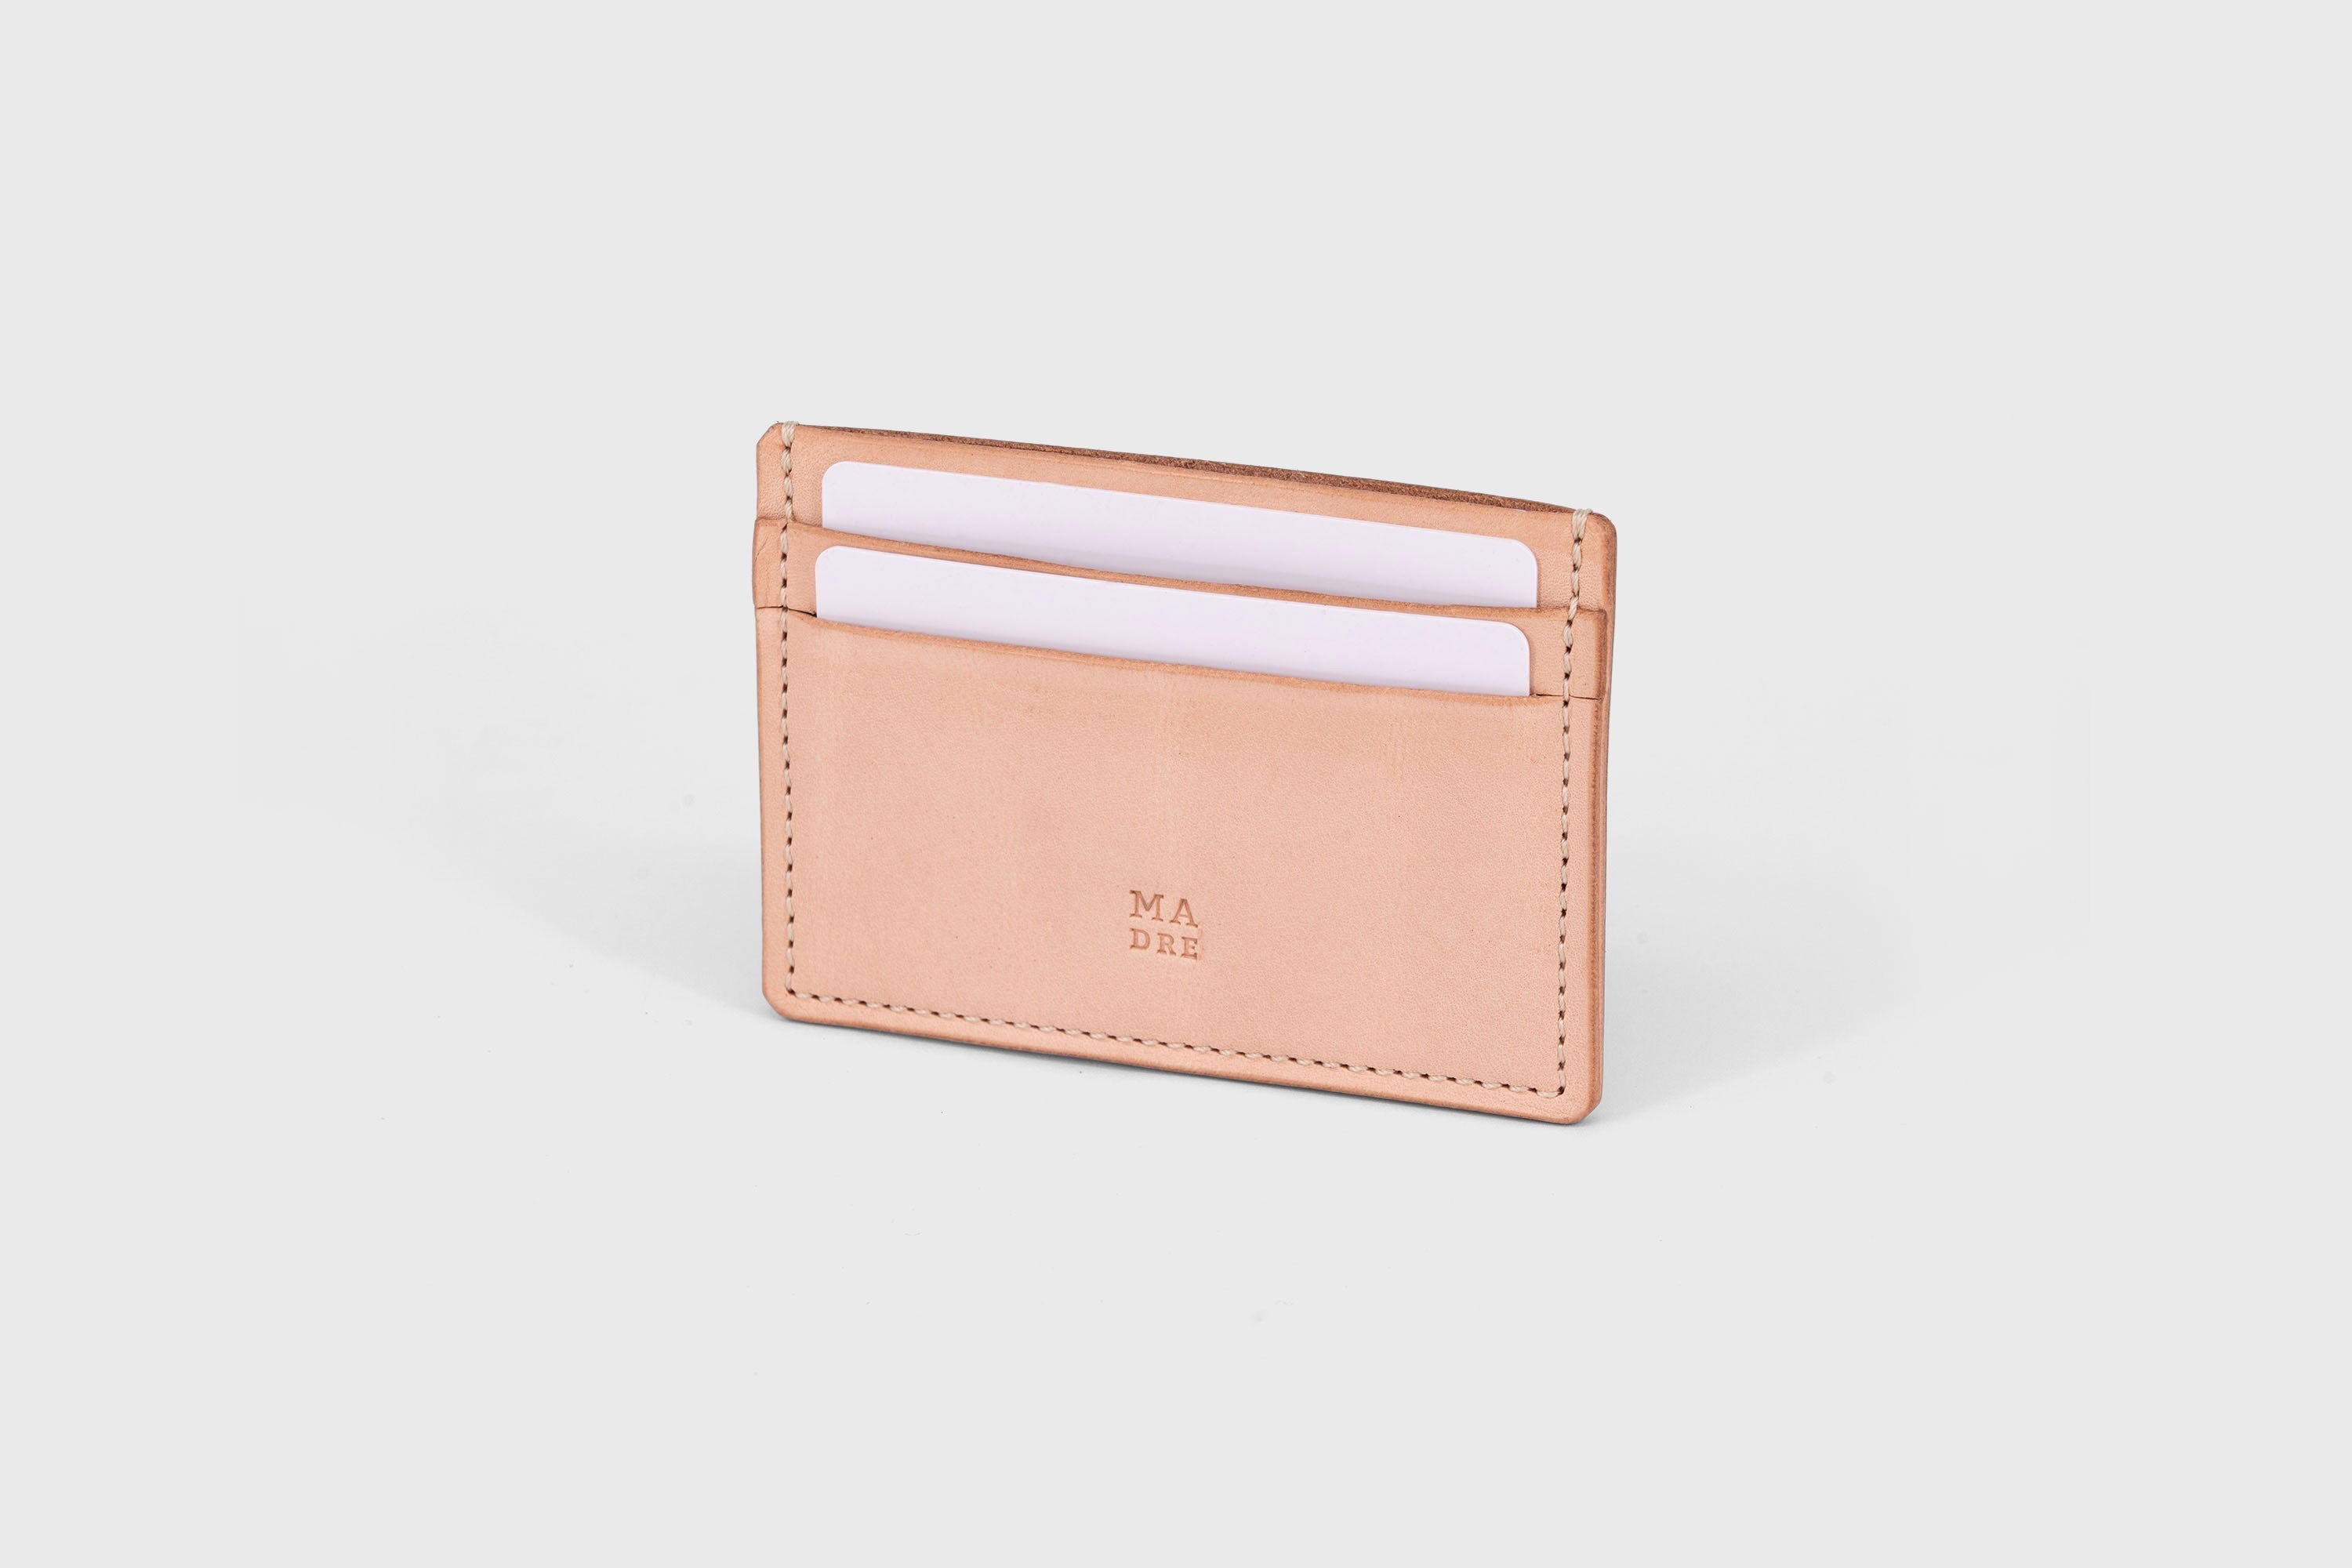 Credit Card Wallet in Nude Color Leather Vachetta Vegetable Tanned Leather Handmade and Design by Atelier Madre Manuel Dreesmann Barcelona Spain